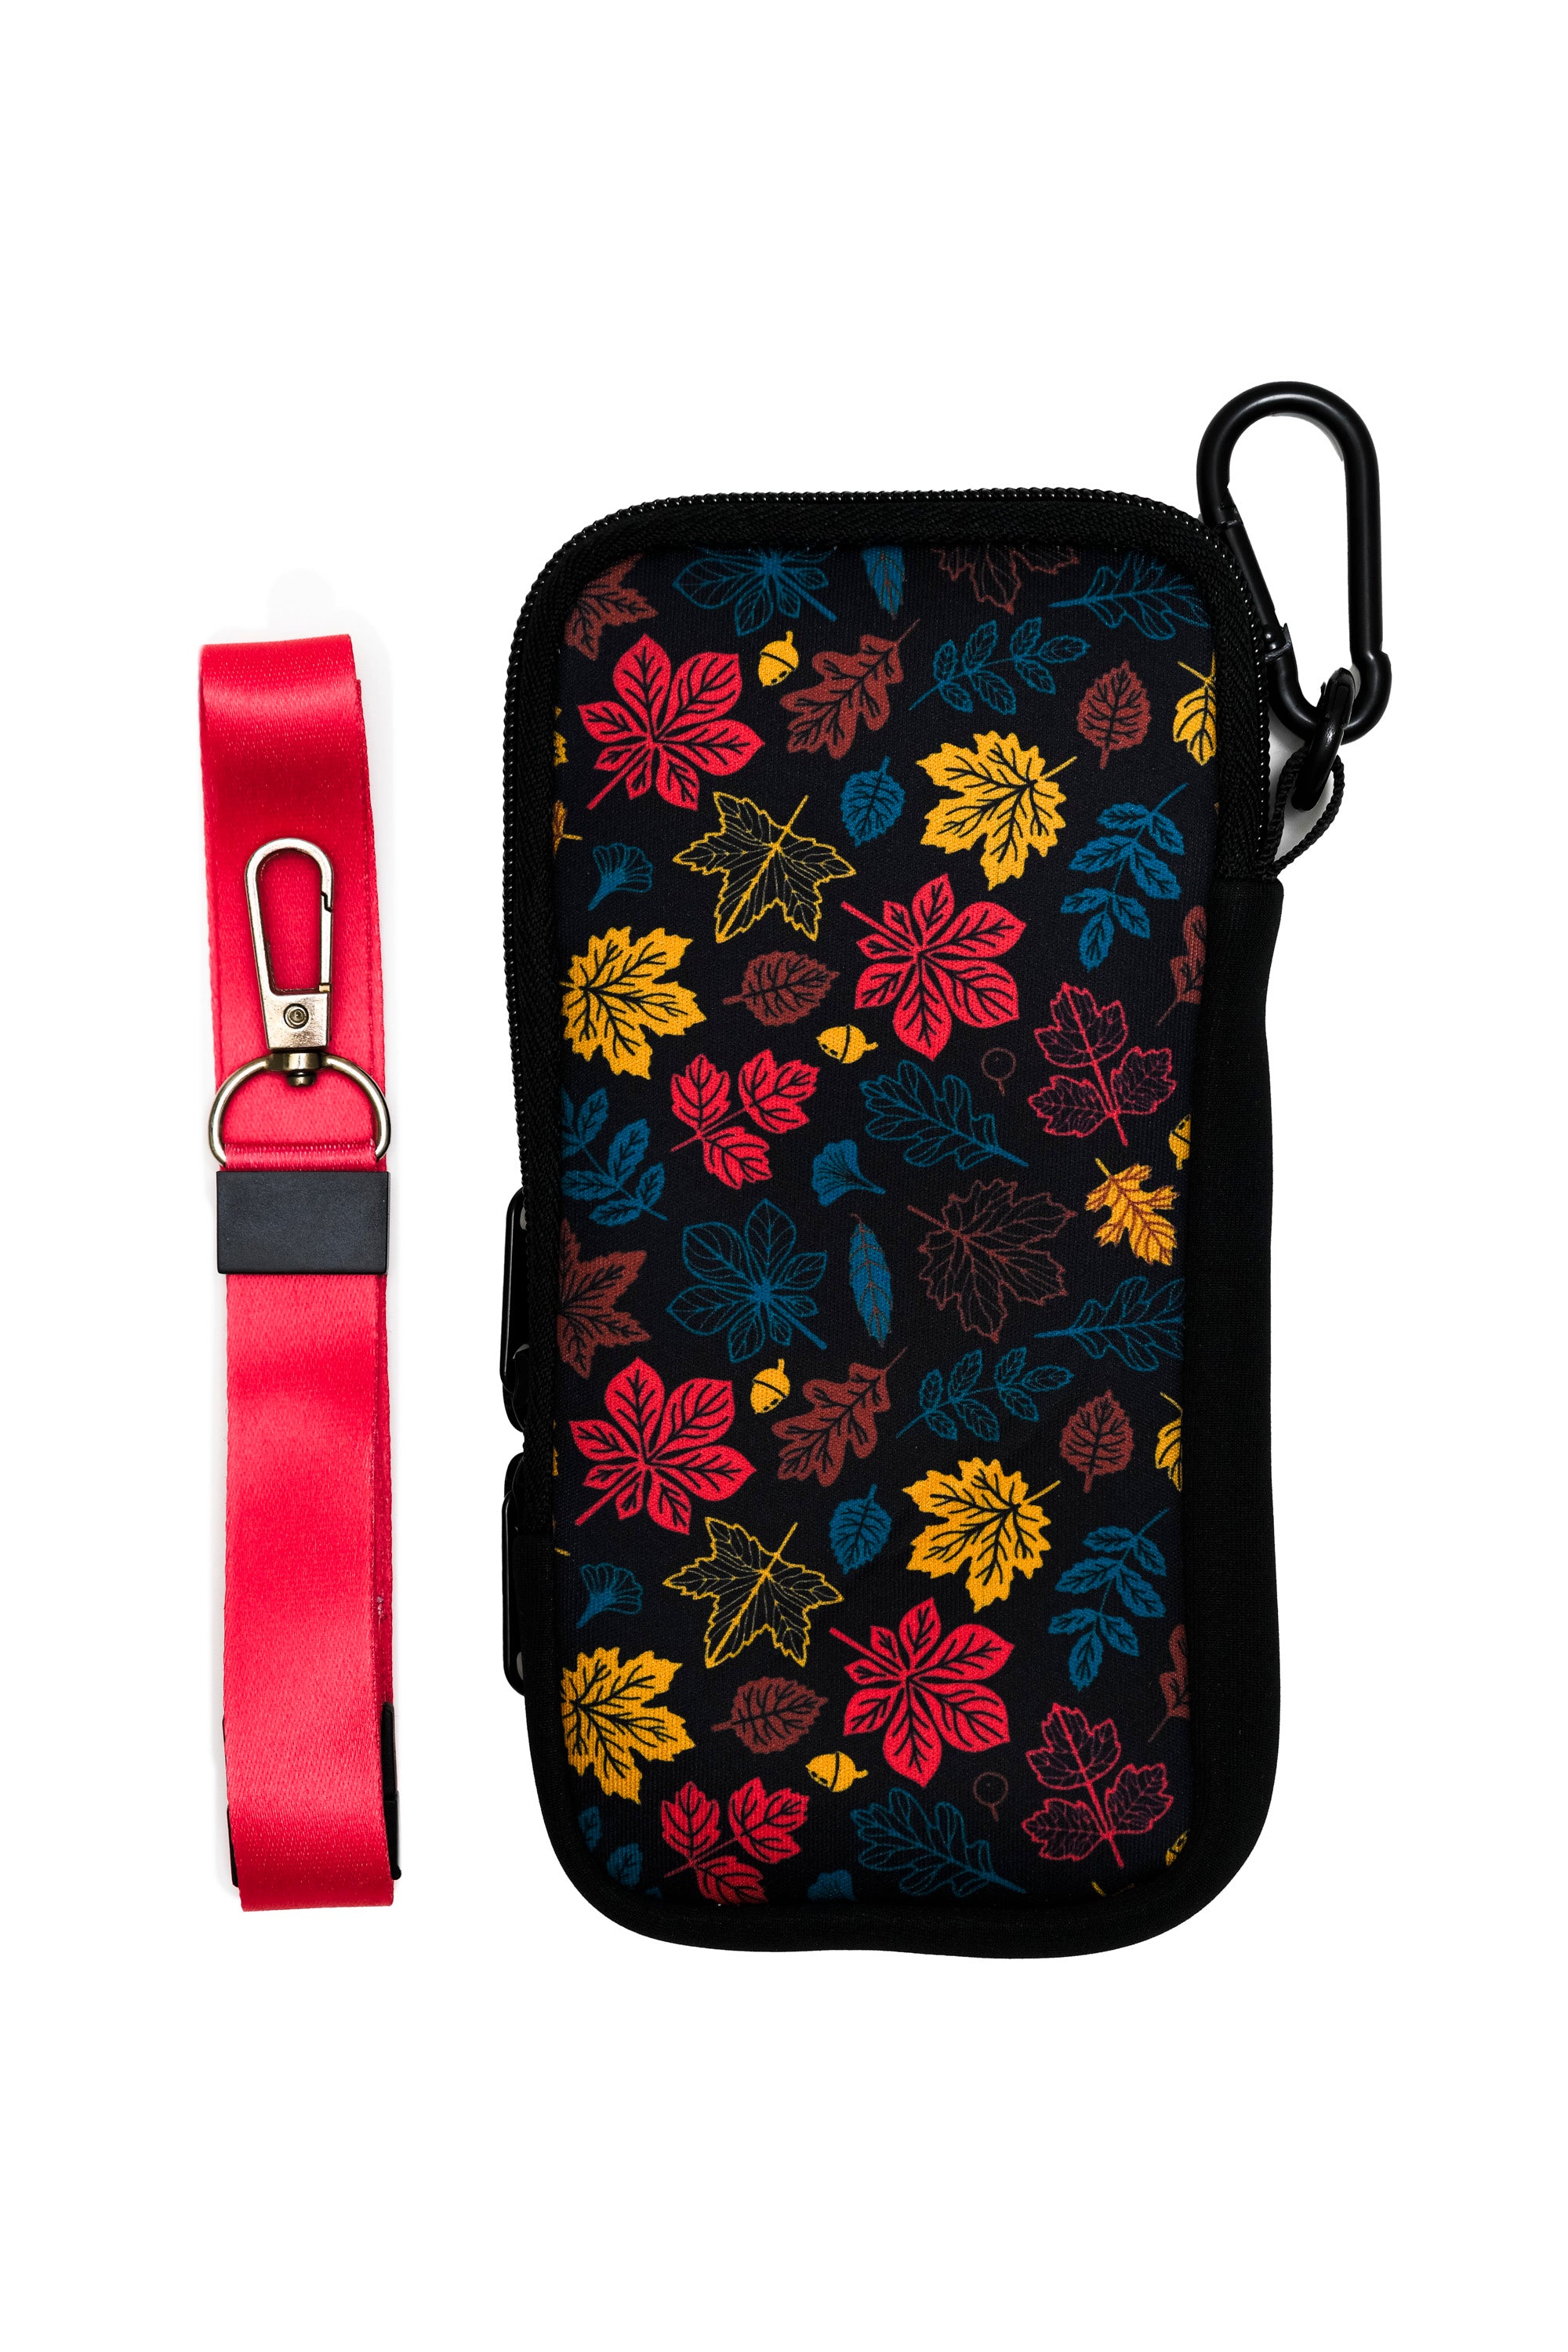 Travel Pouch with Detachable Lanyard - Autumn Leaves